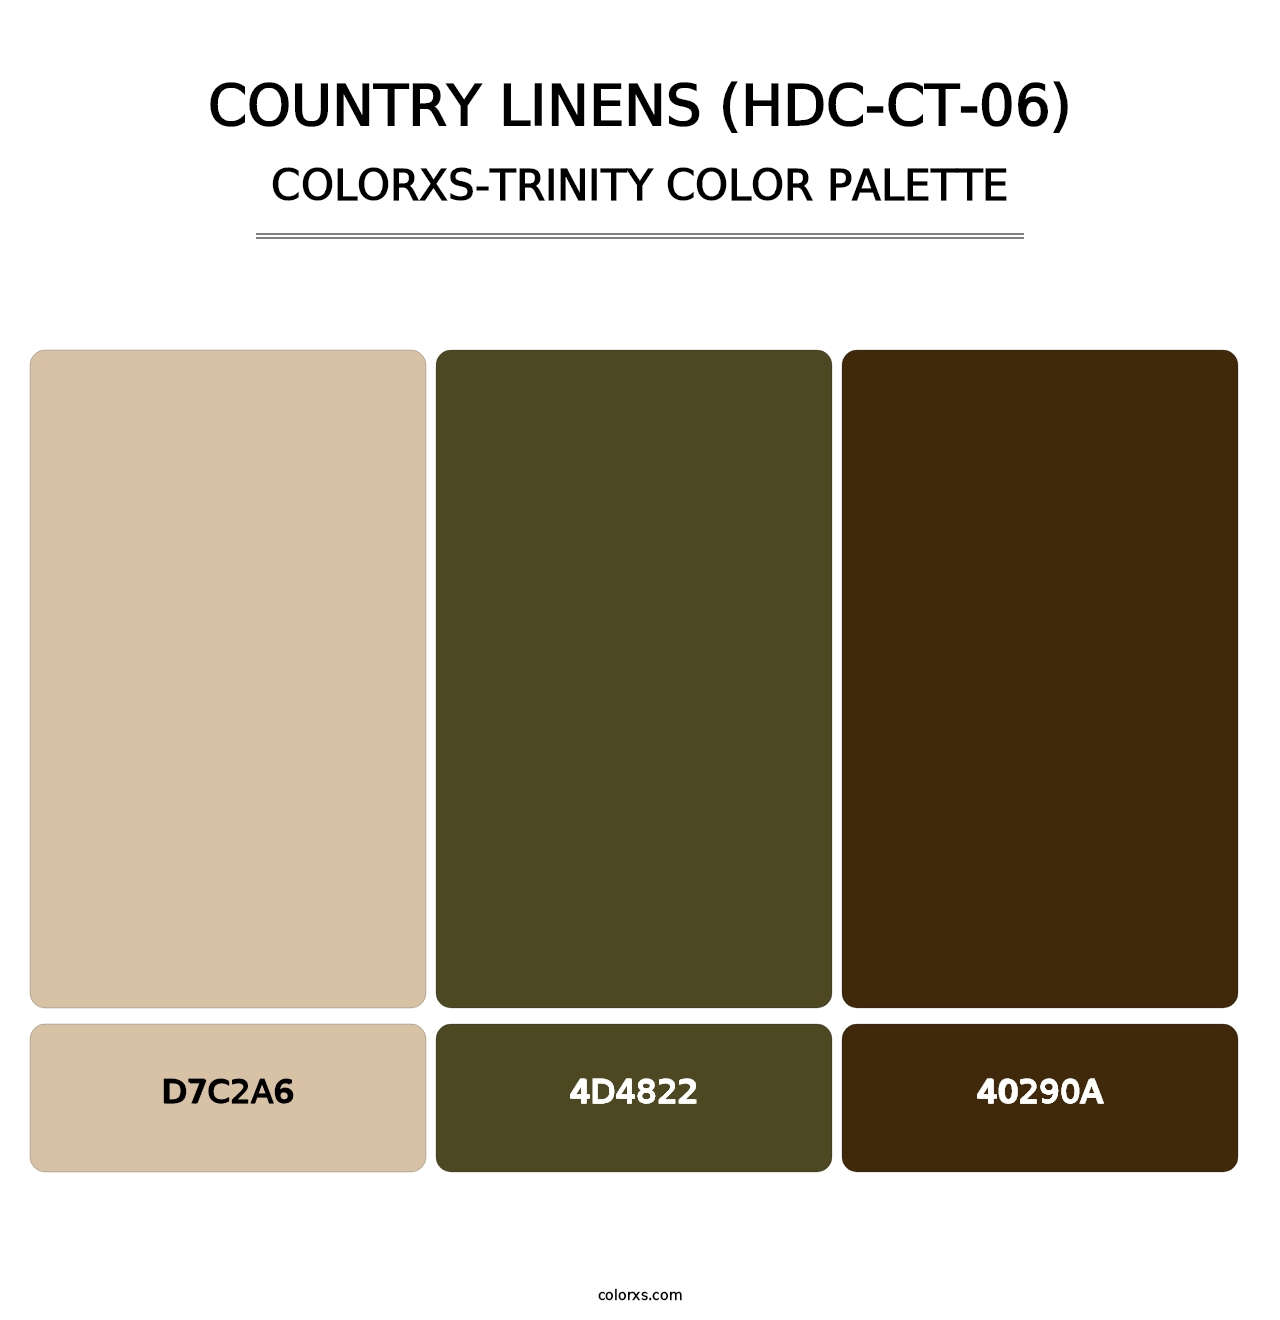 Country Linens (HDC-CT-06) - Colorxs Trinity Palette